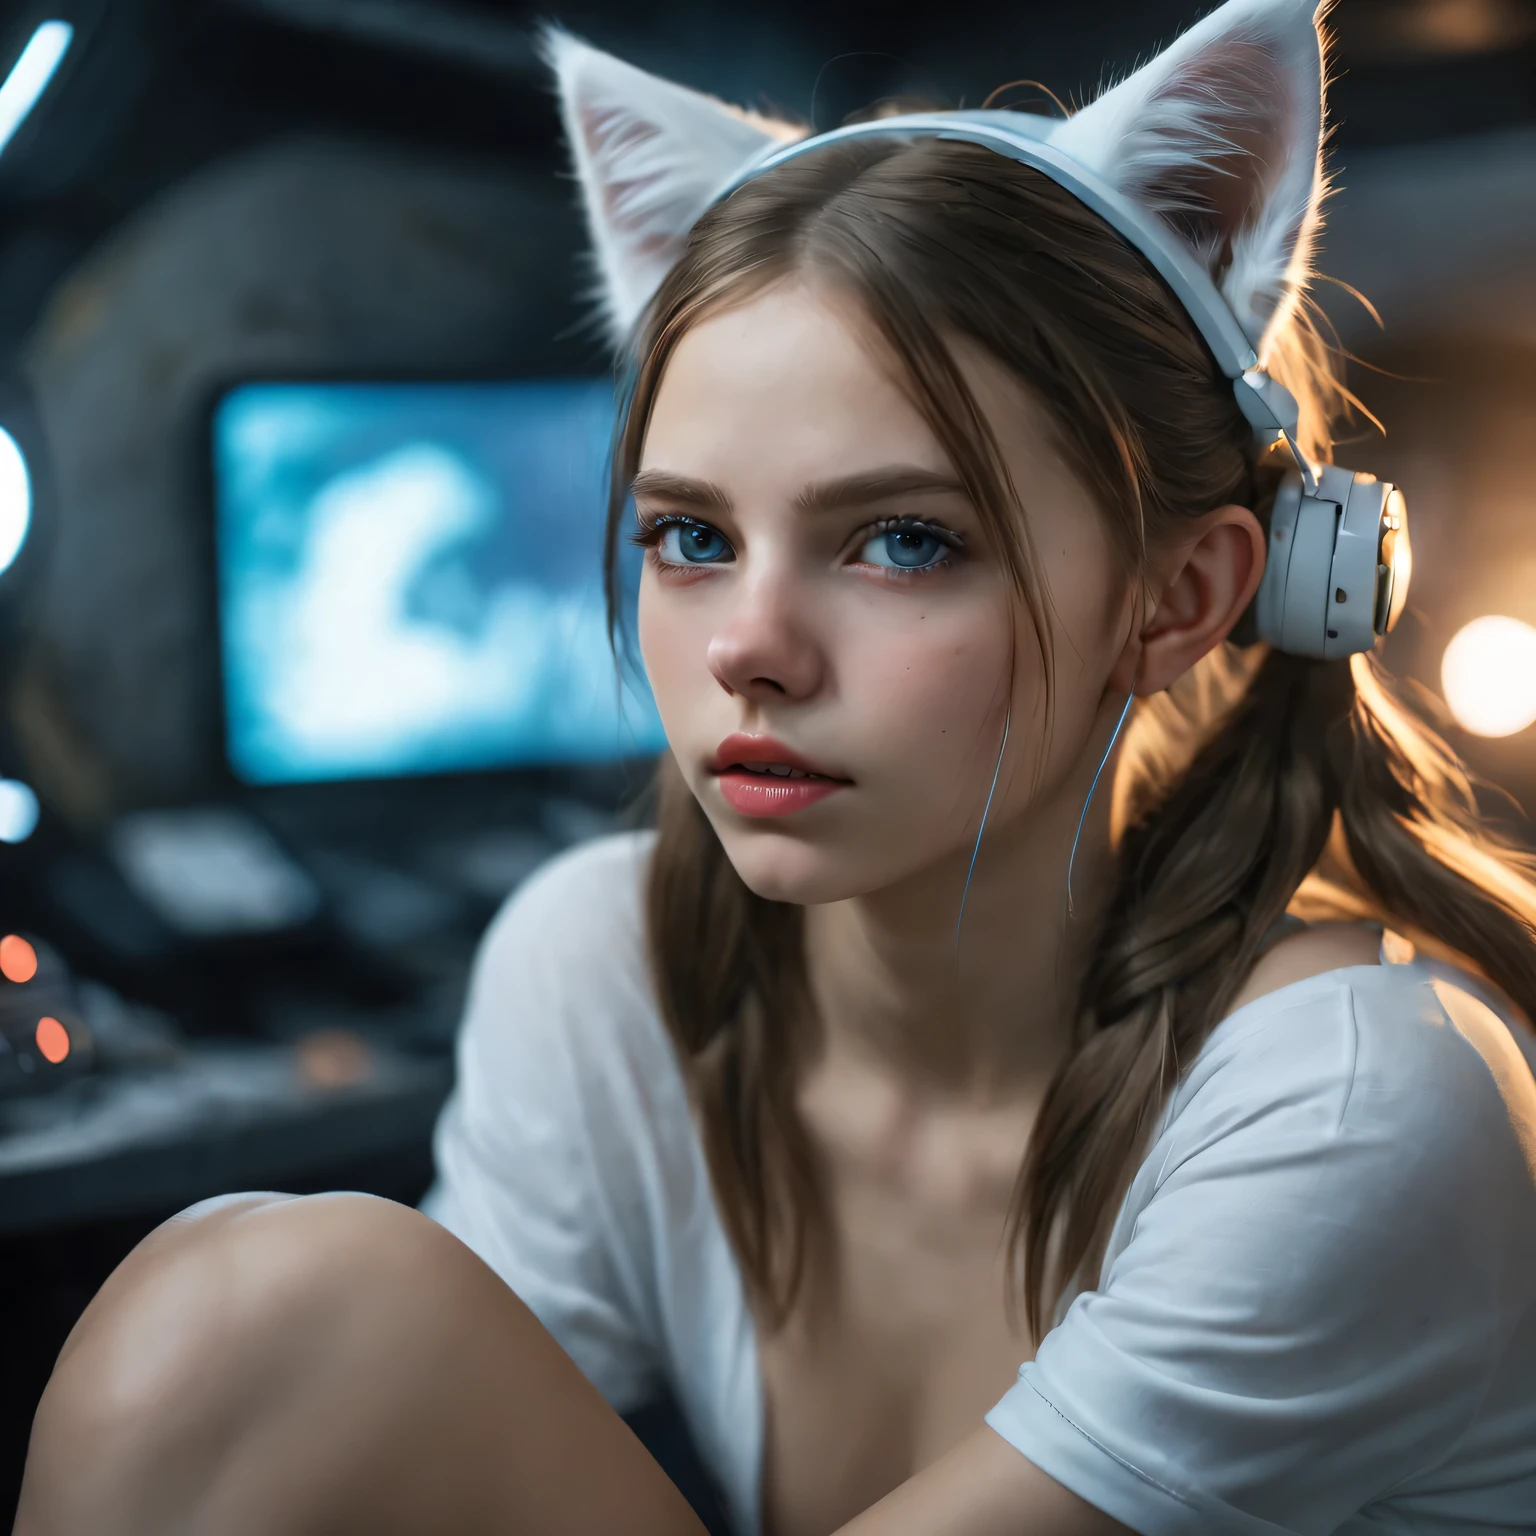 Russian girl,  sitting on a bed,  in a cyberpunk steel bunker with hatches etc.,  in the background. she is wearing white cats ears. She has twintail hairstyle. 16 years old girl,  slim ,  small girl,  beautiful breasts. Masterpiece,  8k,  4k,  high resolution,  dslr,  ultra quality,  sharp focus,  tack sharp,  dof,  film grain,  Fujifilm XT3,  crystal clear,  8K UHD,  highly detailed light blue eyes,  high detailed skin,  skin pores,  seductive,   look,  bewitching lady with beautiful long hair,  brown eyes,  full lips,  long legs,  lovely face wearing torn vaultsuit clothes. , realistic colors, realistic, photorealistic